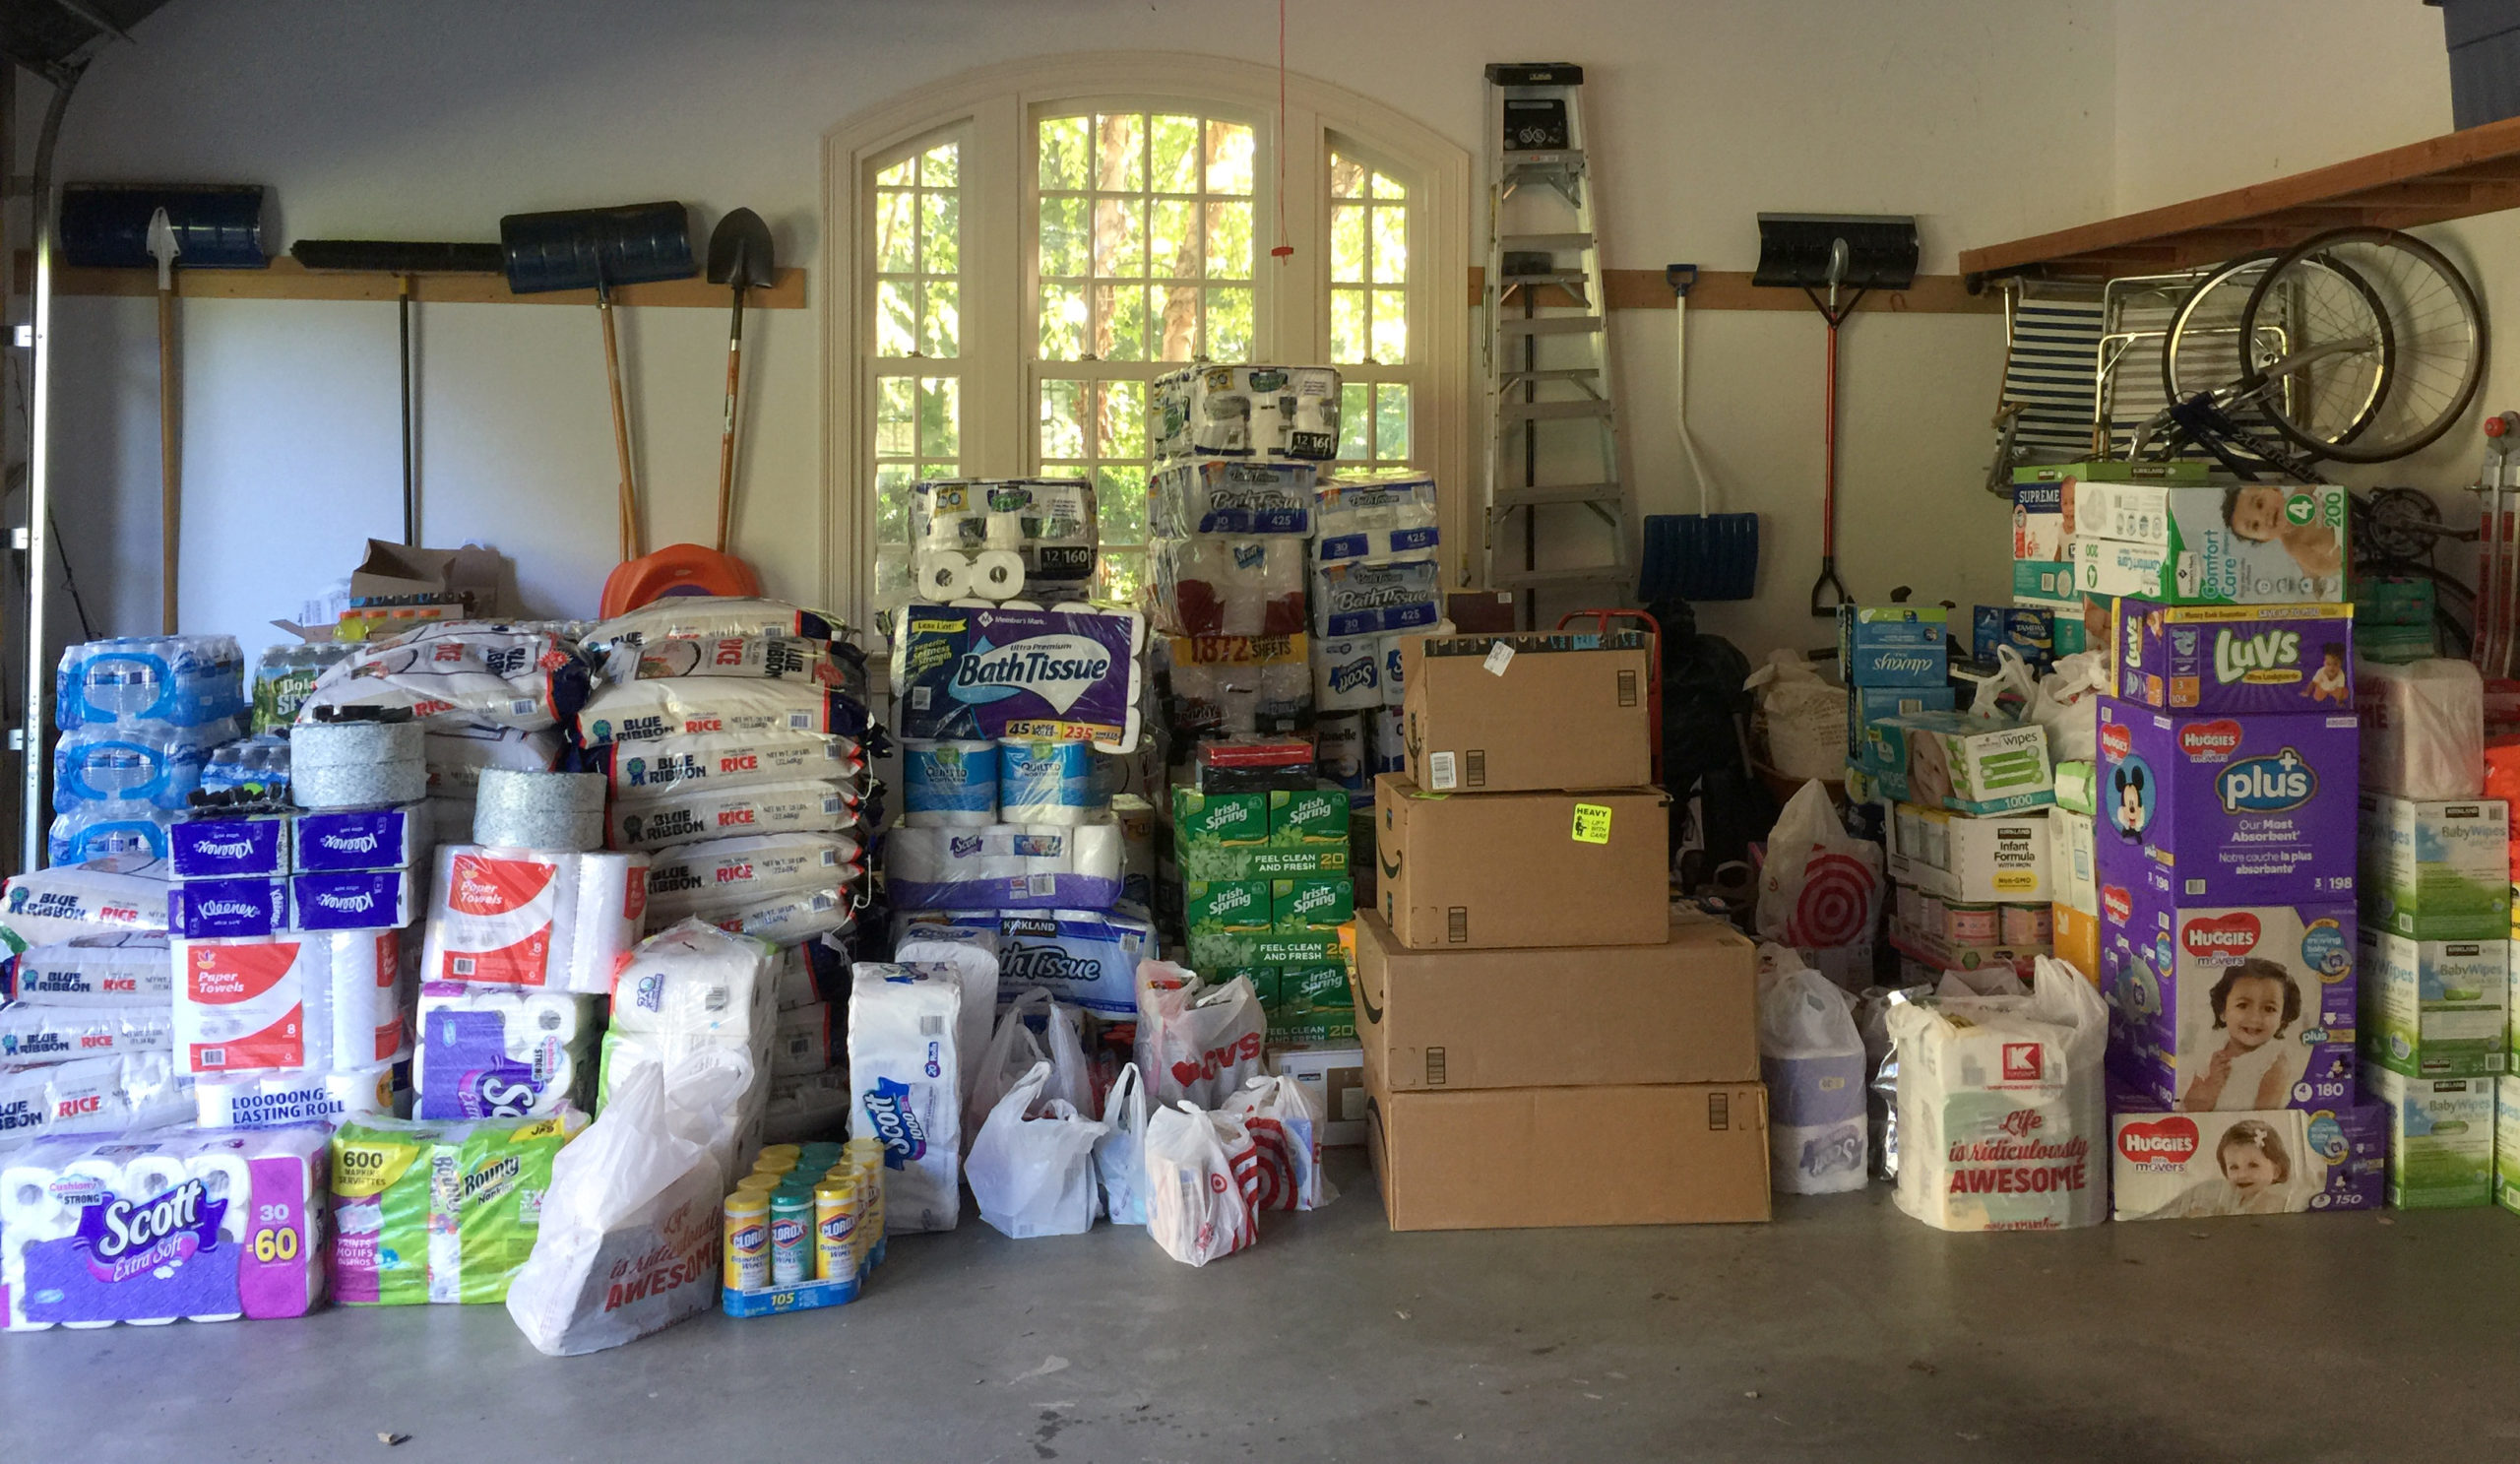 All items collected by Partner Jeffrey Block and Maritza Block for Puerto Rico hurricane relief efforts